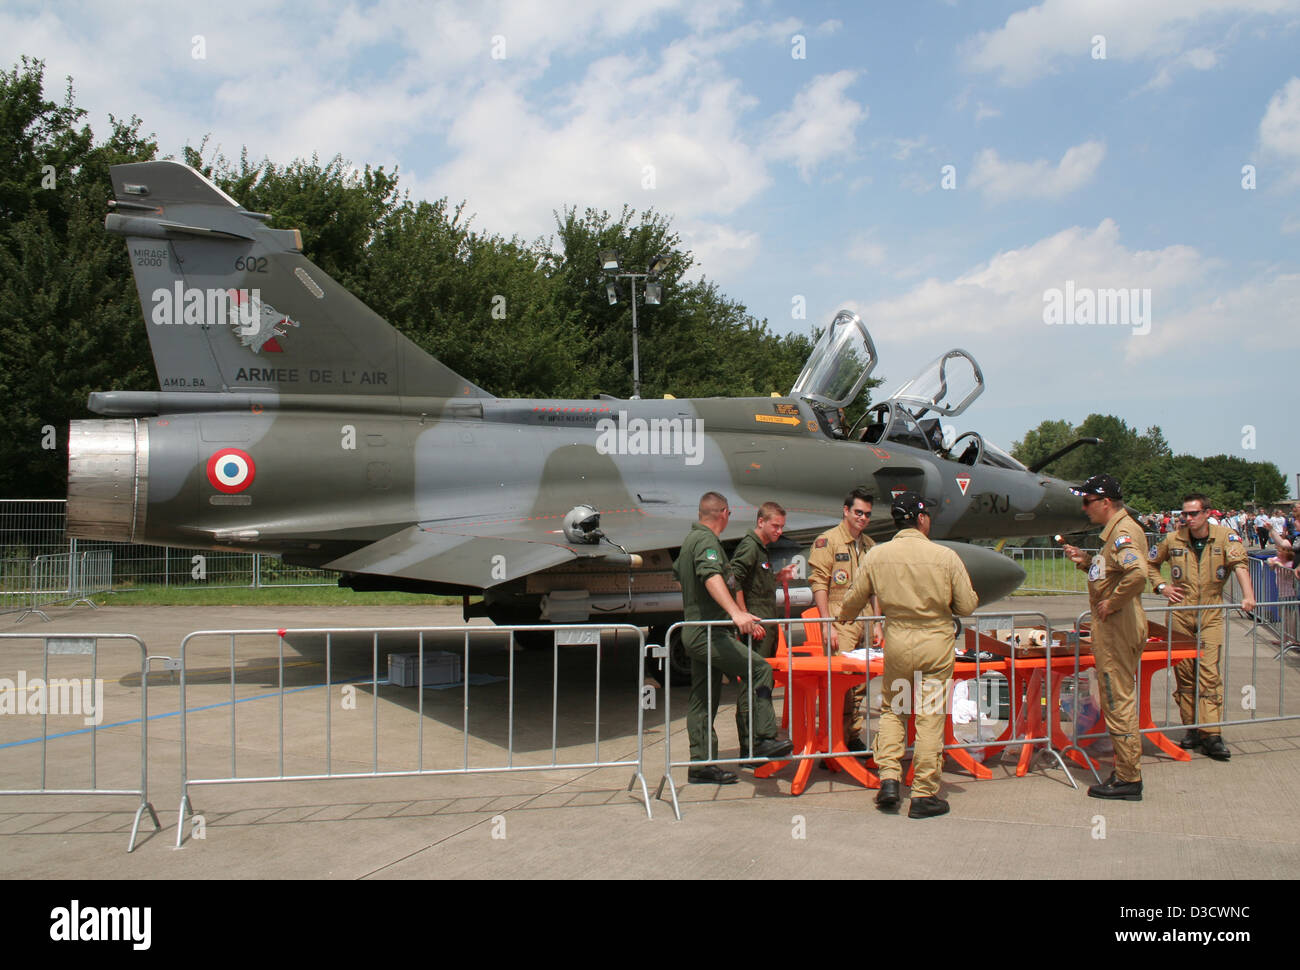 Air crew standing near a French Mirage 2000 fighter jet during an airshow. Stock Photo